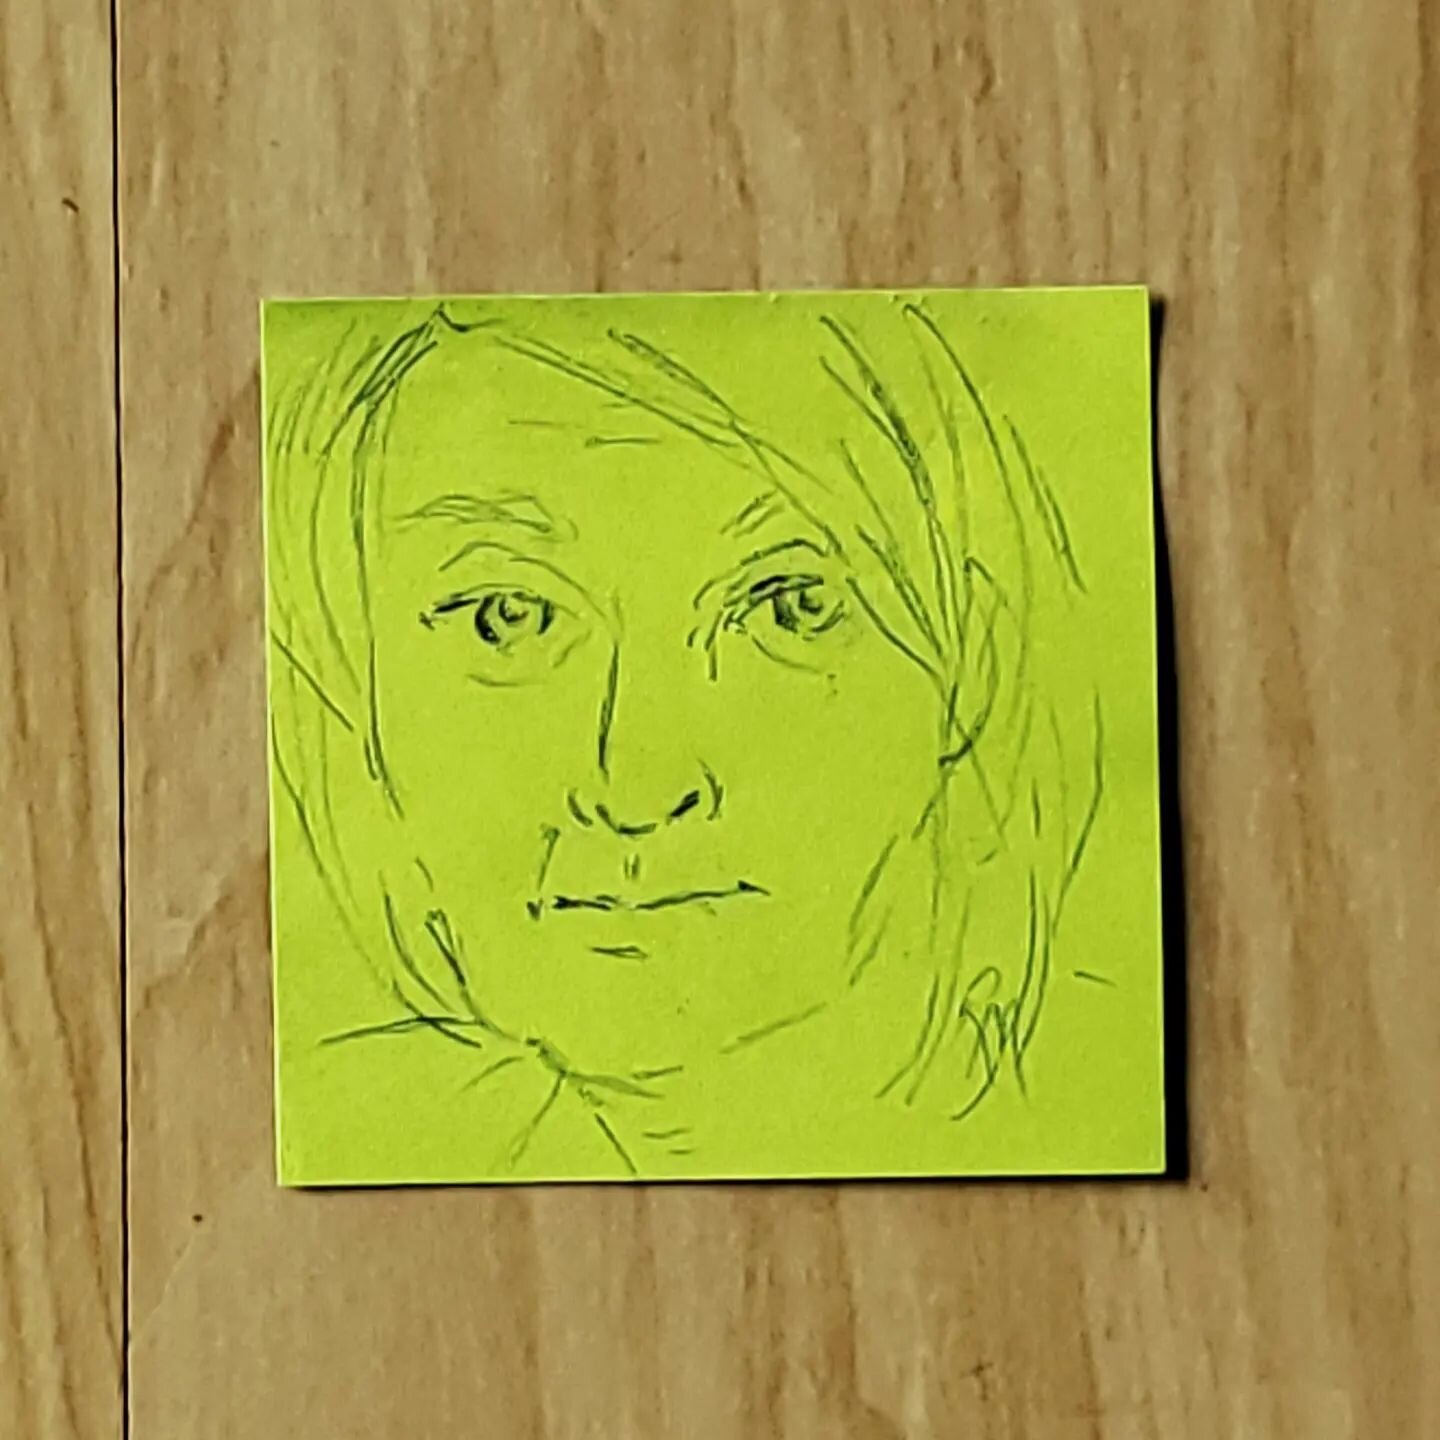 2 x 2&quot; sticky note self-portrait challenge from @colbyasanford stories a few days ago. This was the only color &amp; size sticky note I had, so here we go! So funny that it fits in my squares with the Grinch cookies a few posts back! #selfportra